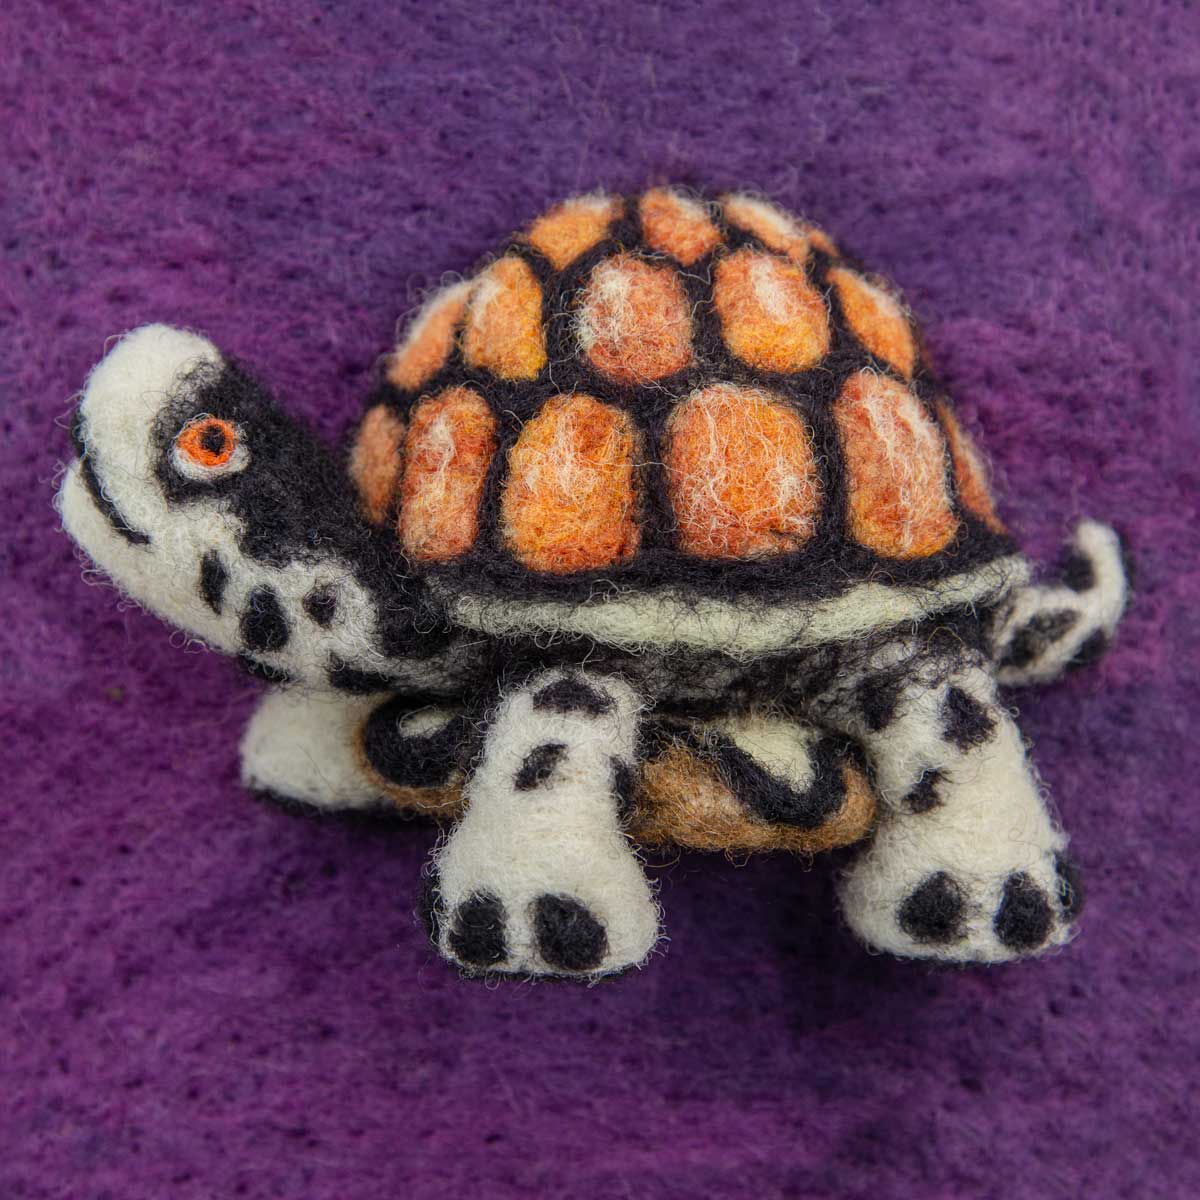 Turtle - Needle Felted Illustration for Hillary Dow's ABC picture book